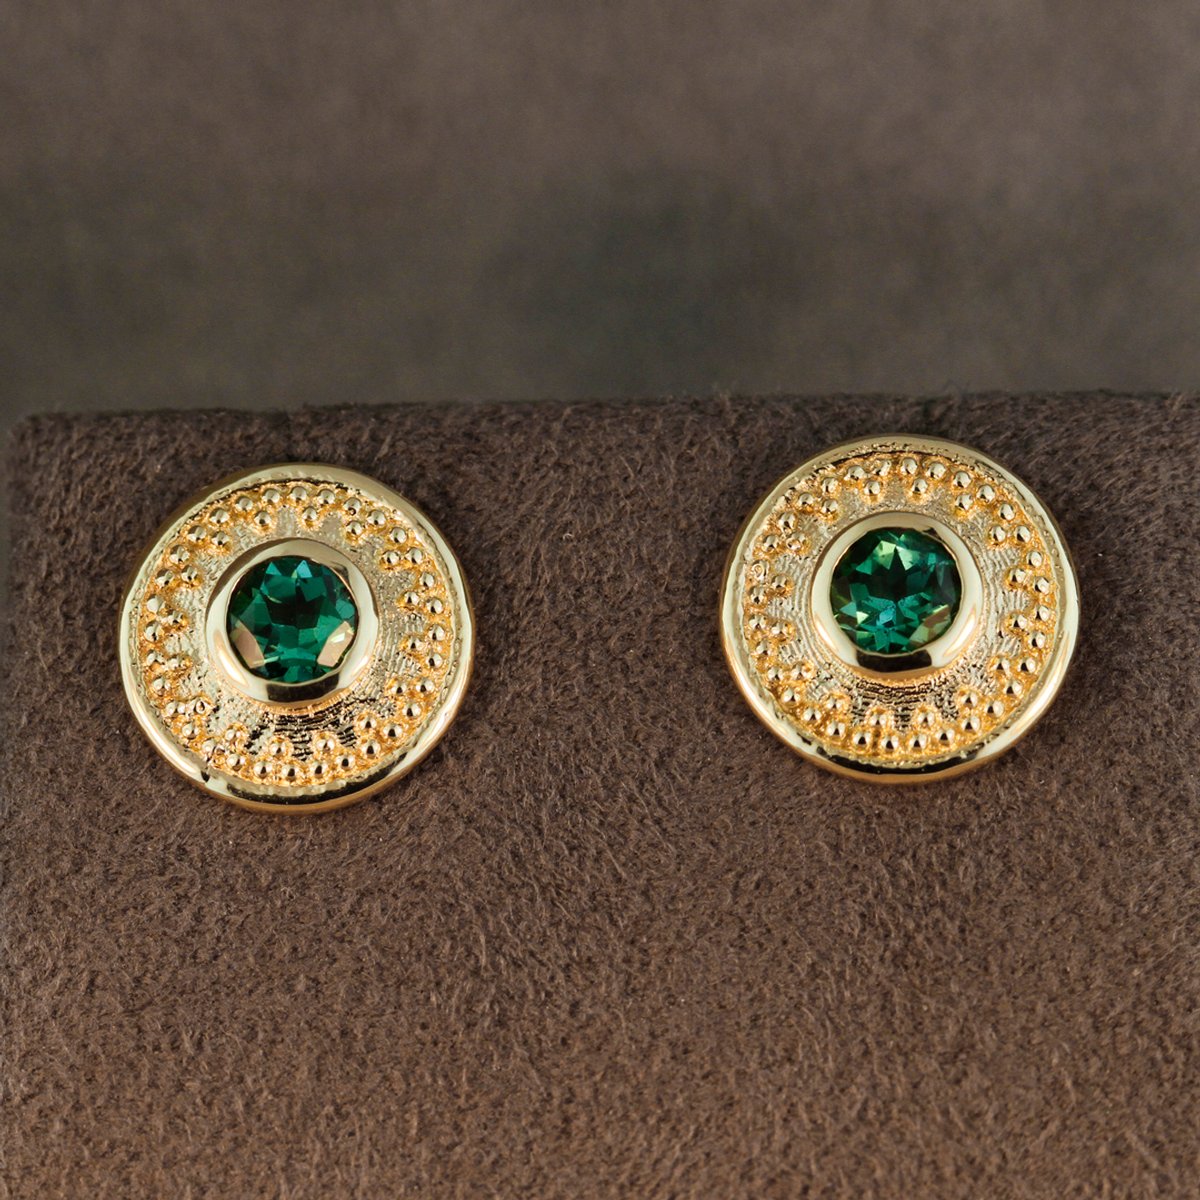 Green Tourmaline and Granulated 14K Gold Earrings